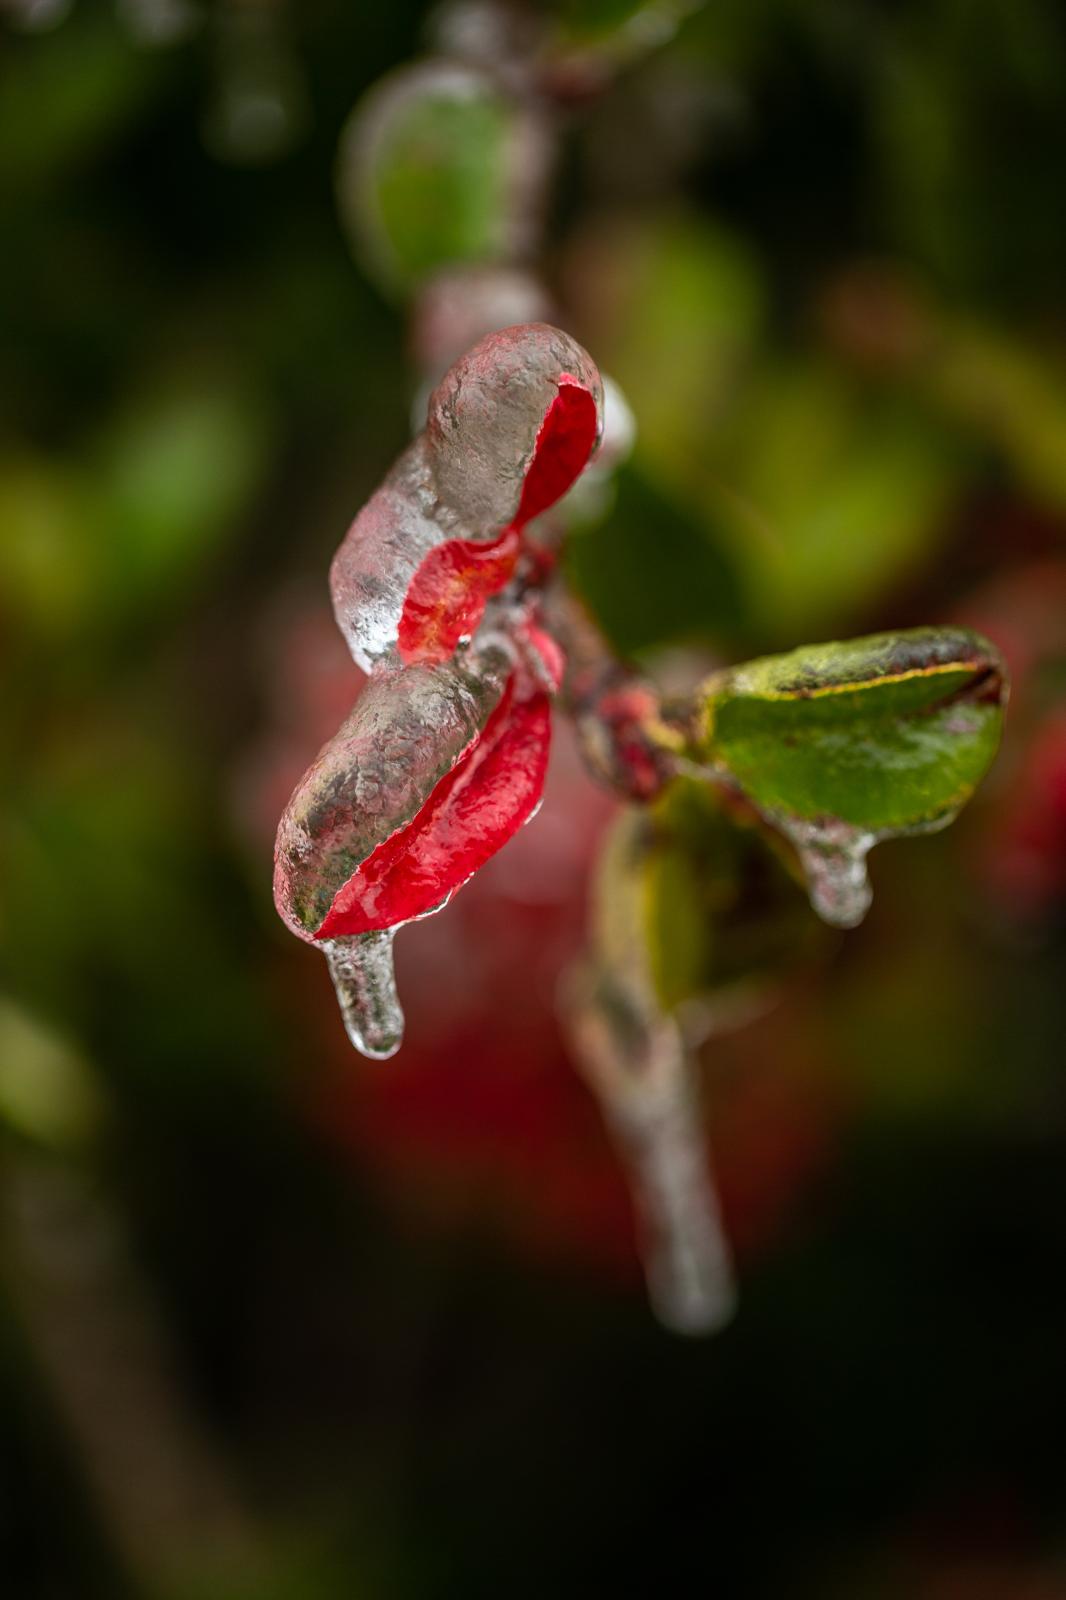 BEAUTY AS A WARNING   - Vibrancy encased in ice, Central Texas, February, 2023.